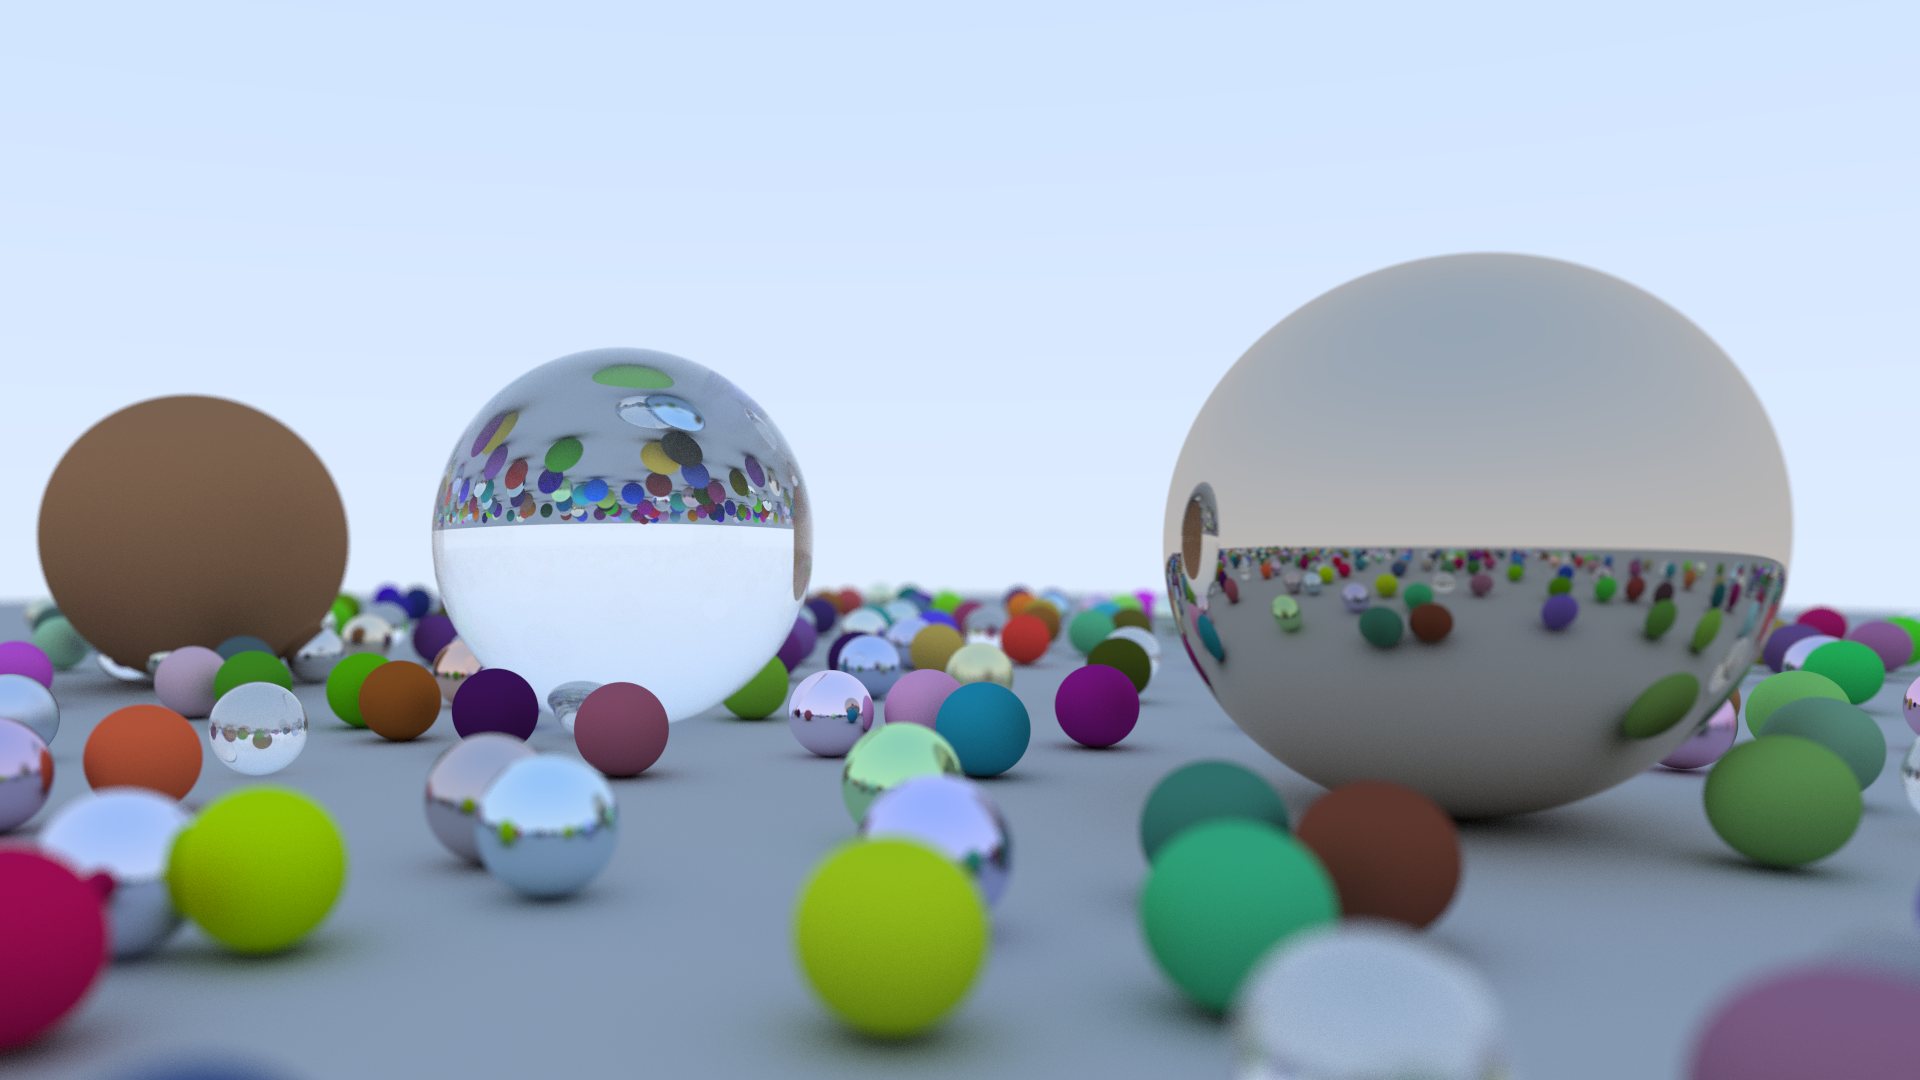 The final result. This scene contains three large spheres with different materials&mdash;lambertian, dielectric and metal. They are surrounded
by a lot of little spheres with various colors and materials.